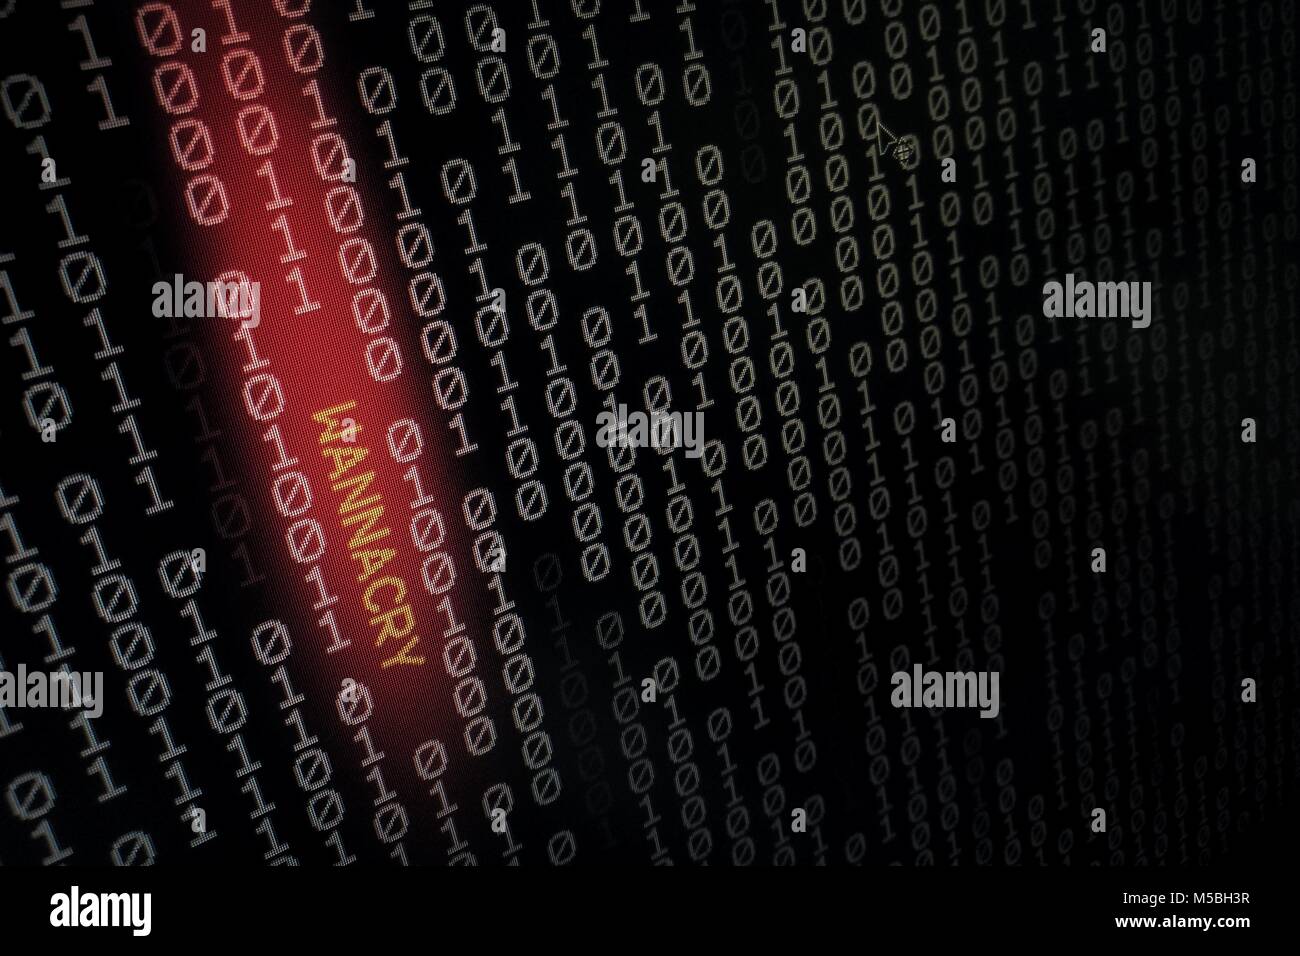 computer virus. binary data shown on black screen with wannacry text hilight with red colour. Stock Photo